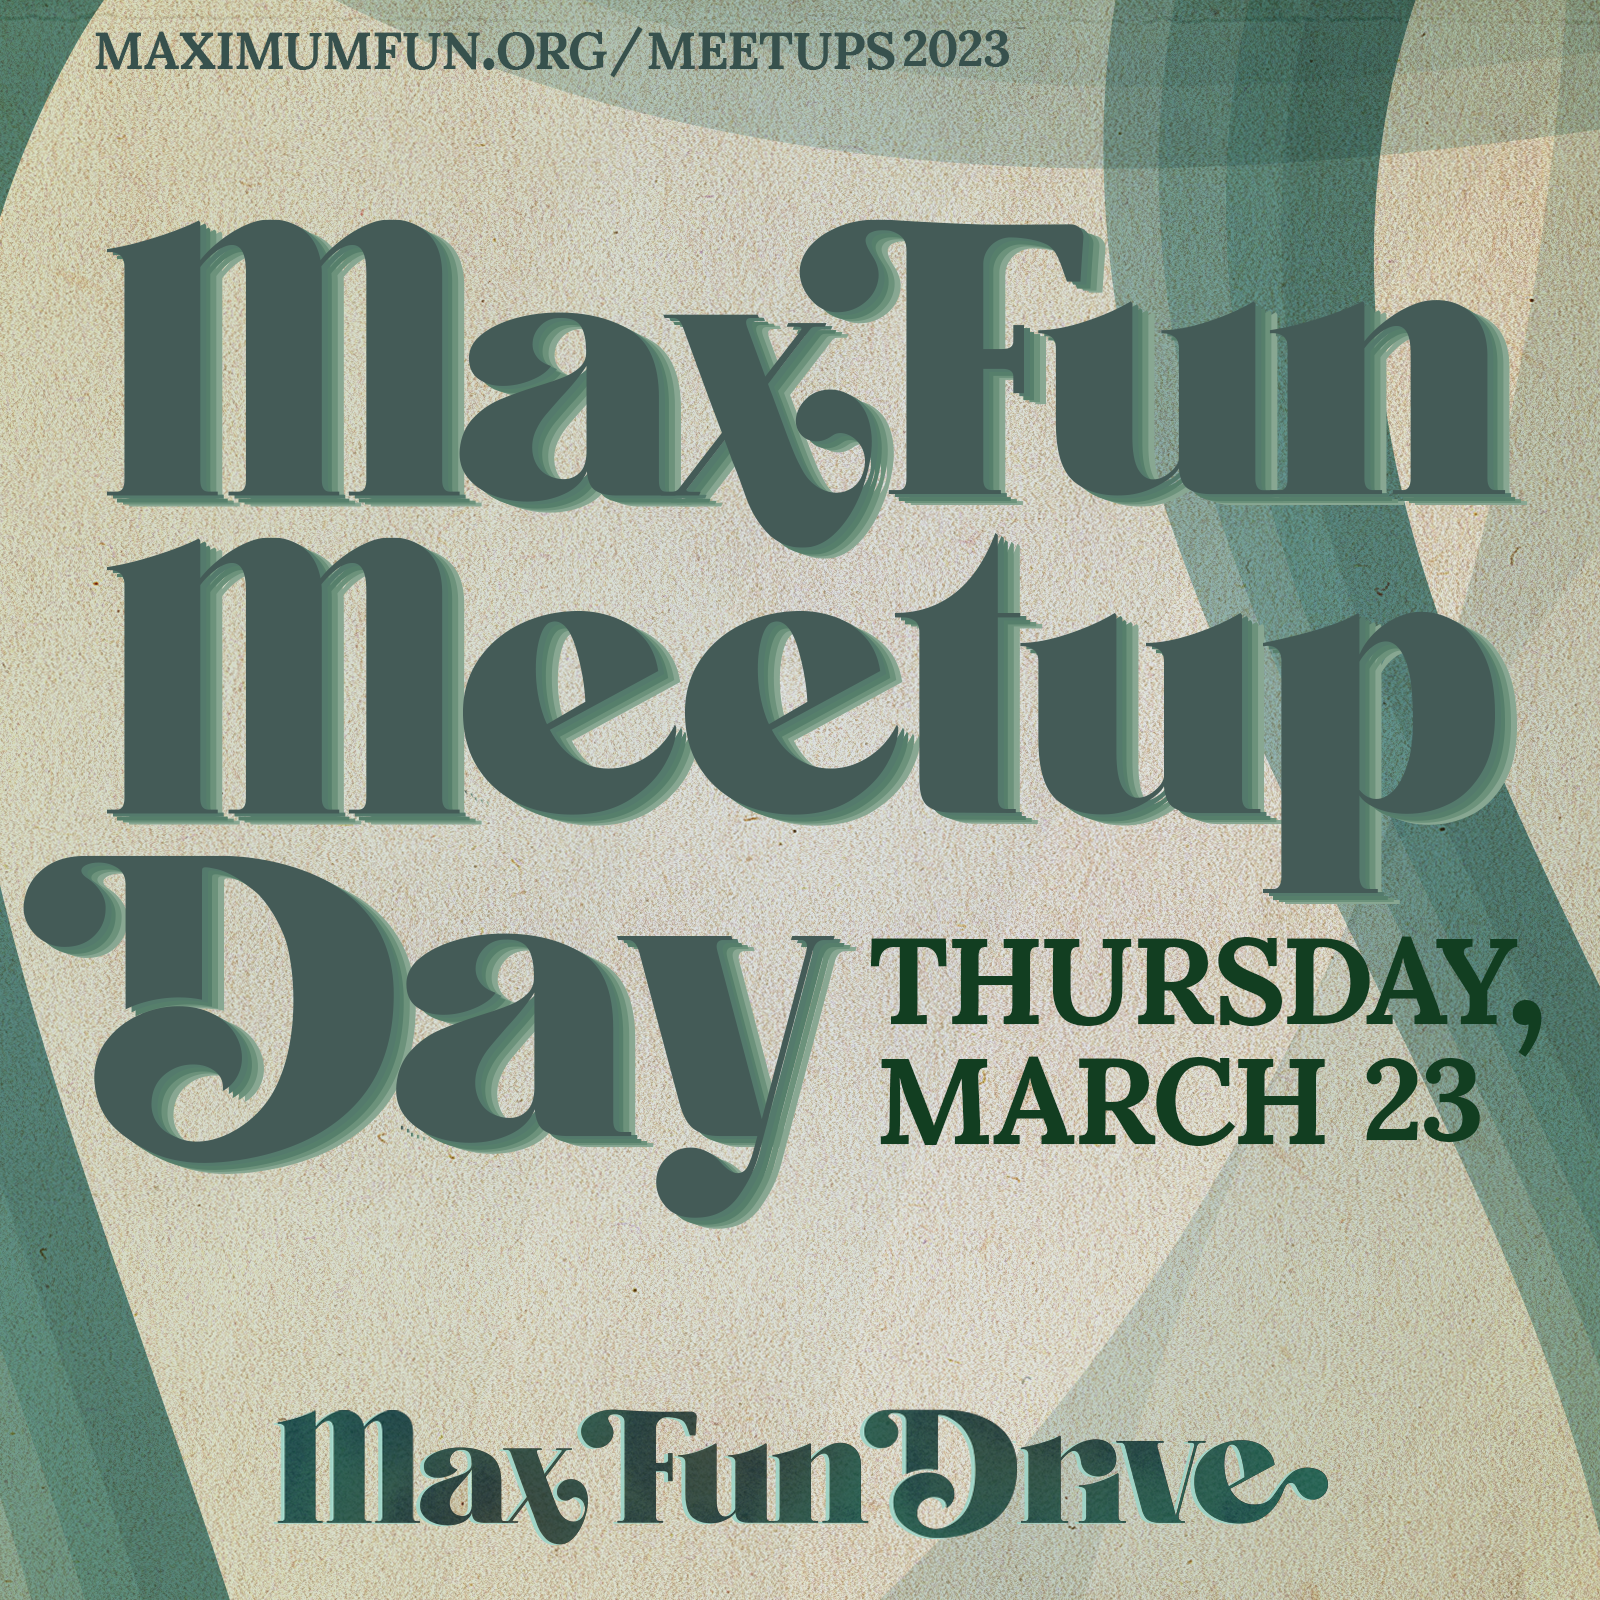 The words "MaxFun Meetup Day" in a green retro font, with "Thursday, March 23" in a darker serif font. All on a tan background with swoops of green on either side.